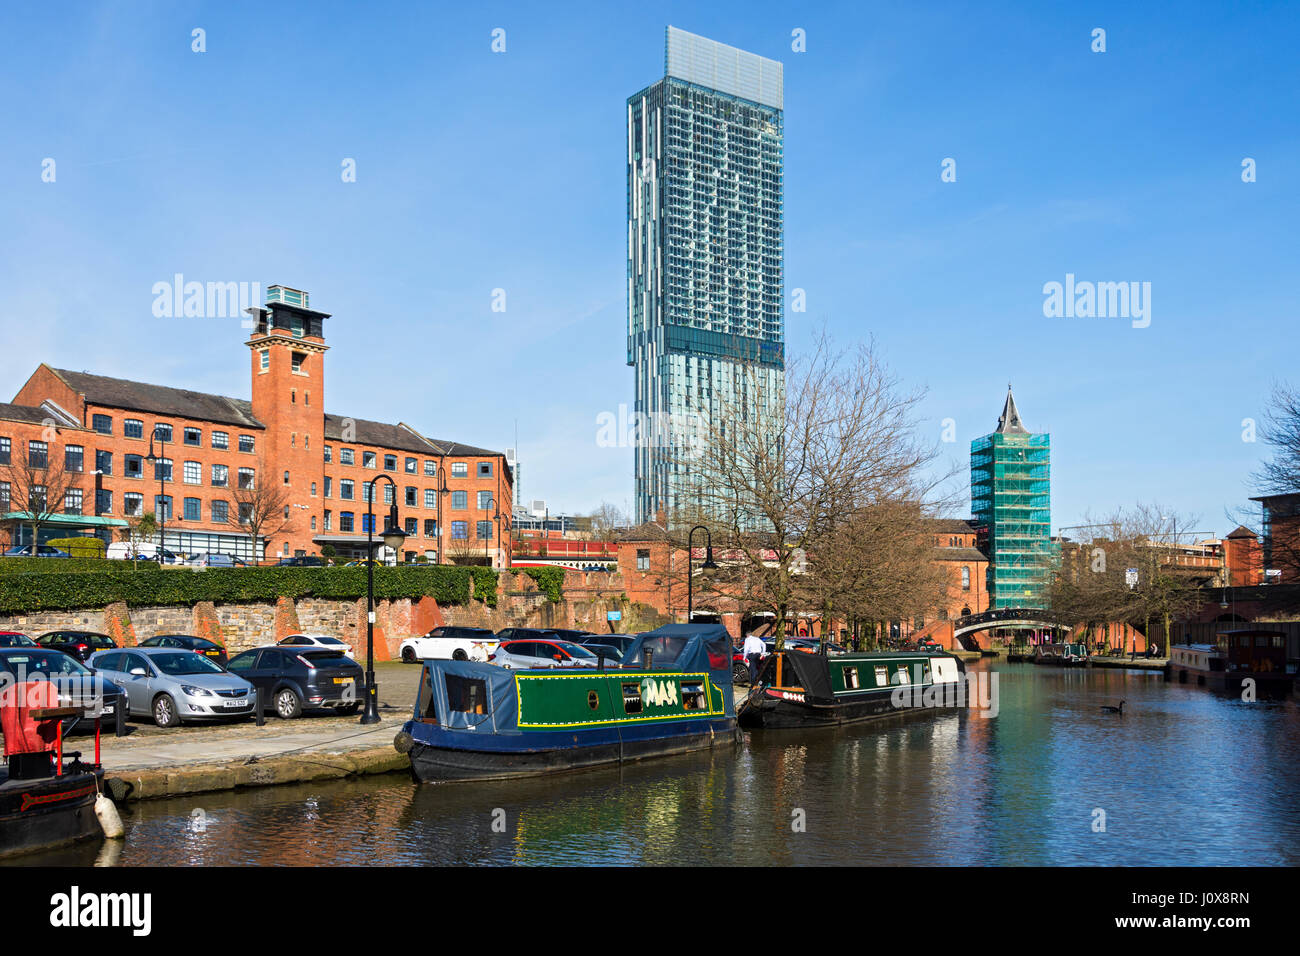 The Beetham Tower and narrowboats on the Bridgewater Canal at Castlefield, Manchester, England, UK. Stock Photo